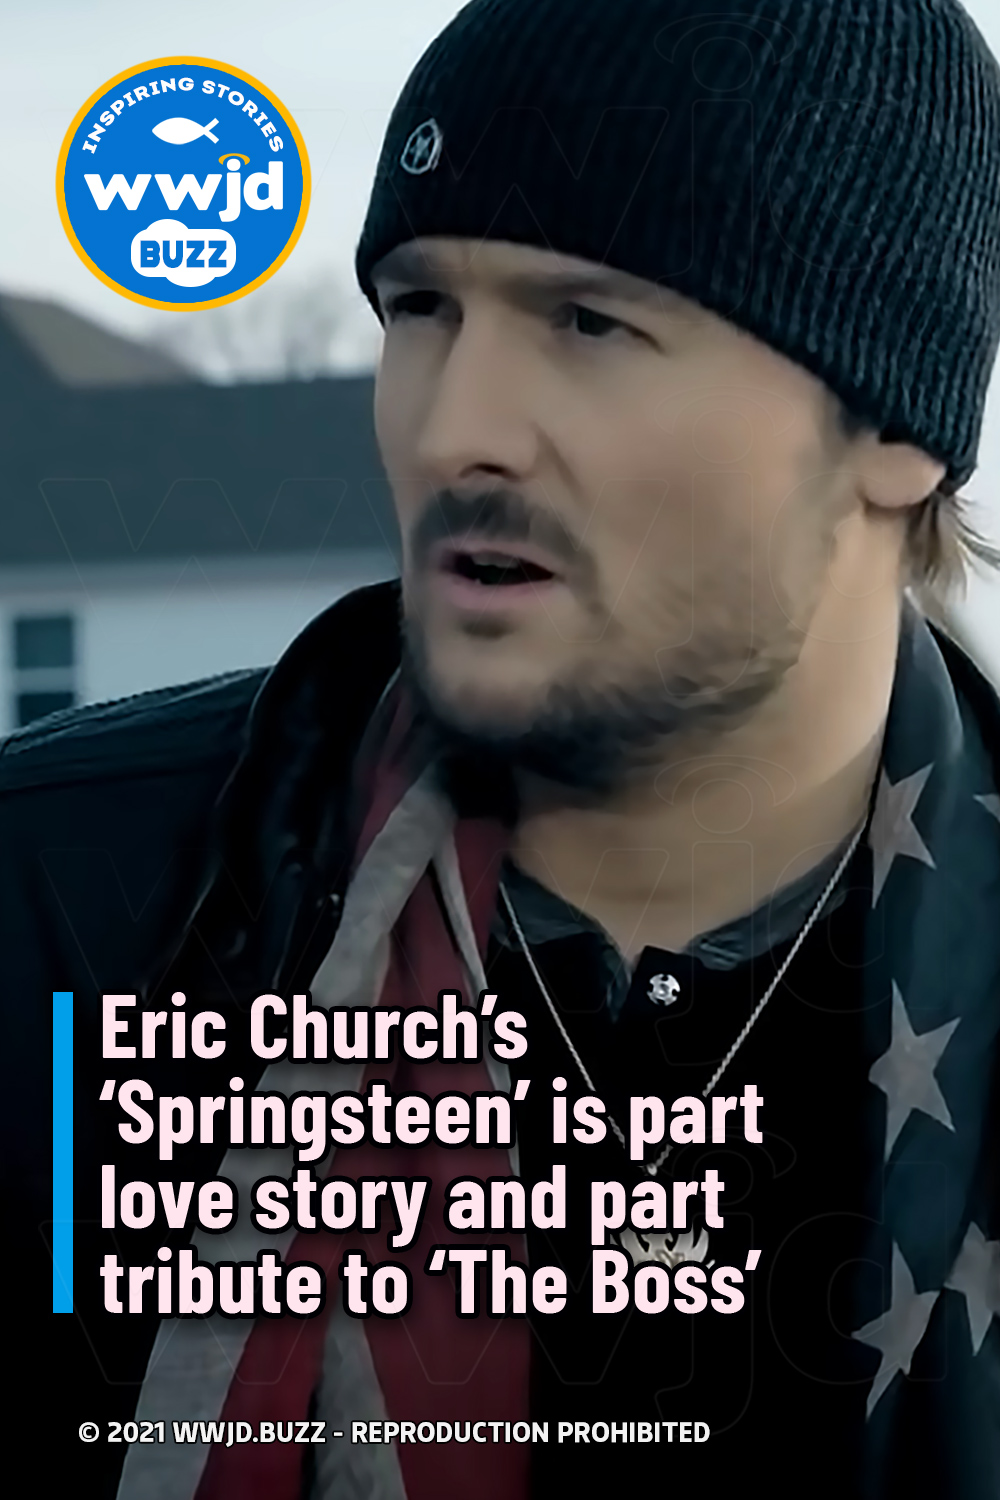 Eric Church’s ‘Springsteen’ is part love story and part tribute to ‘The Boss’